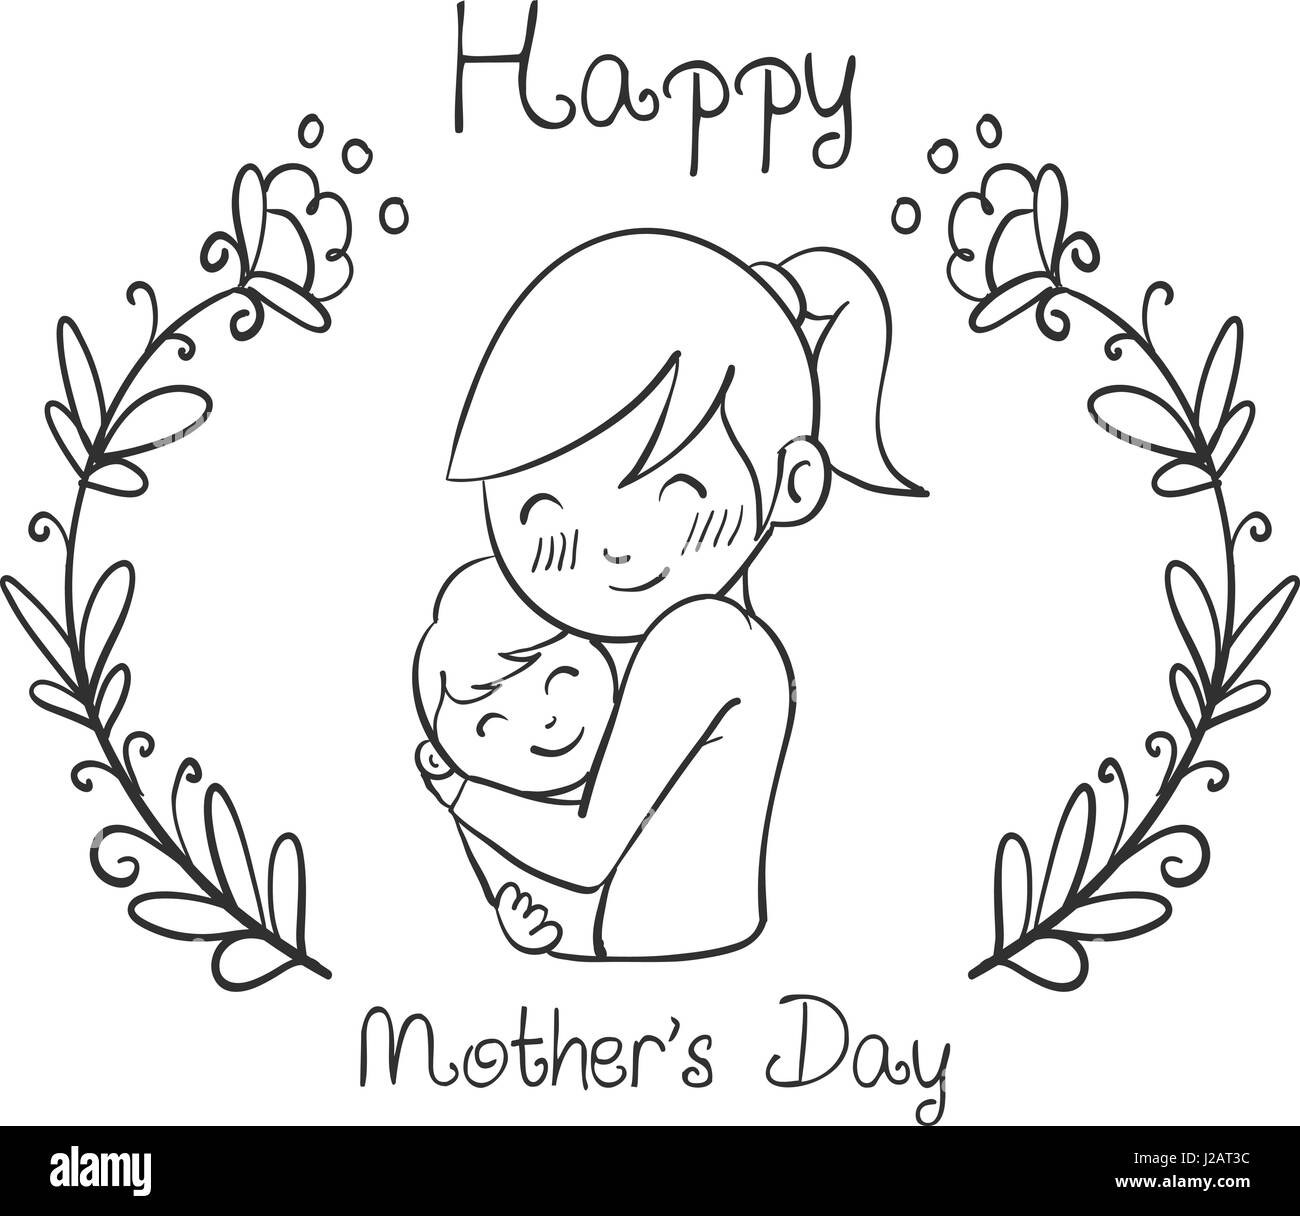 Mother's Day Drawing - How To Draw Mother's Day Step By Step